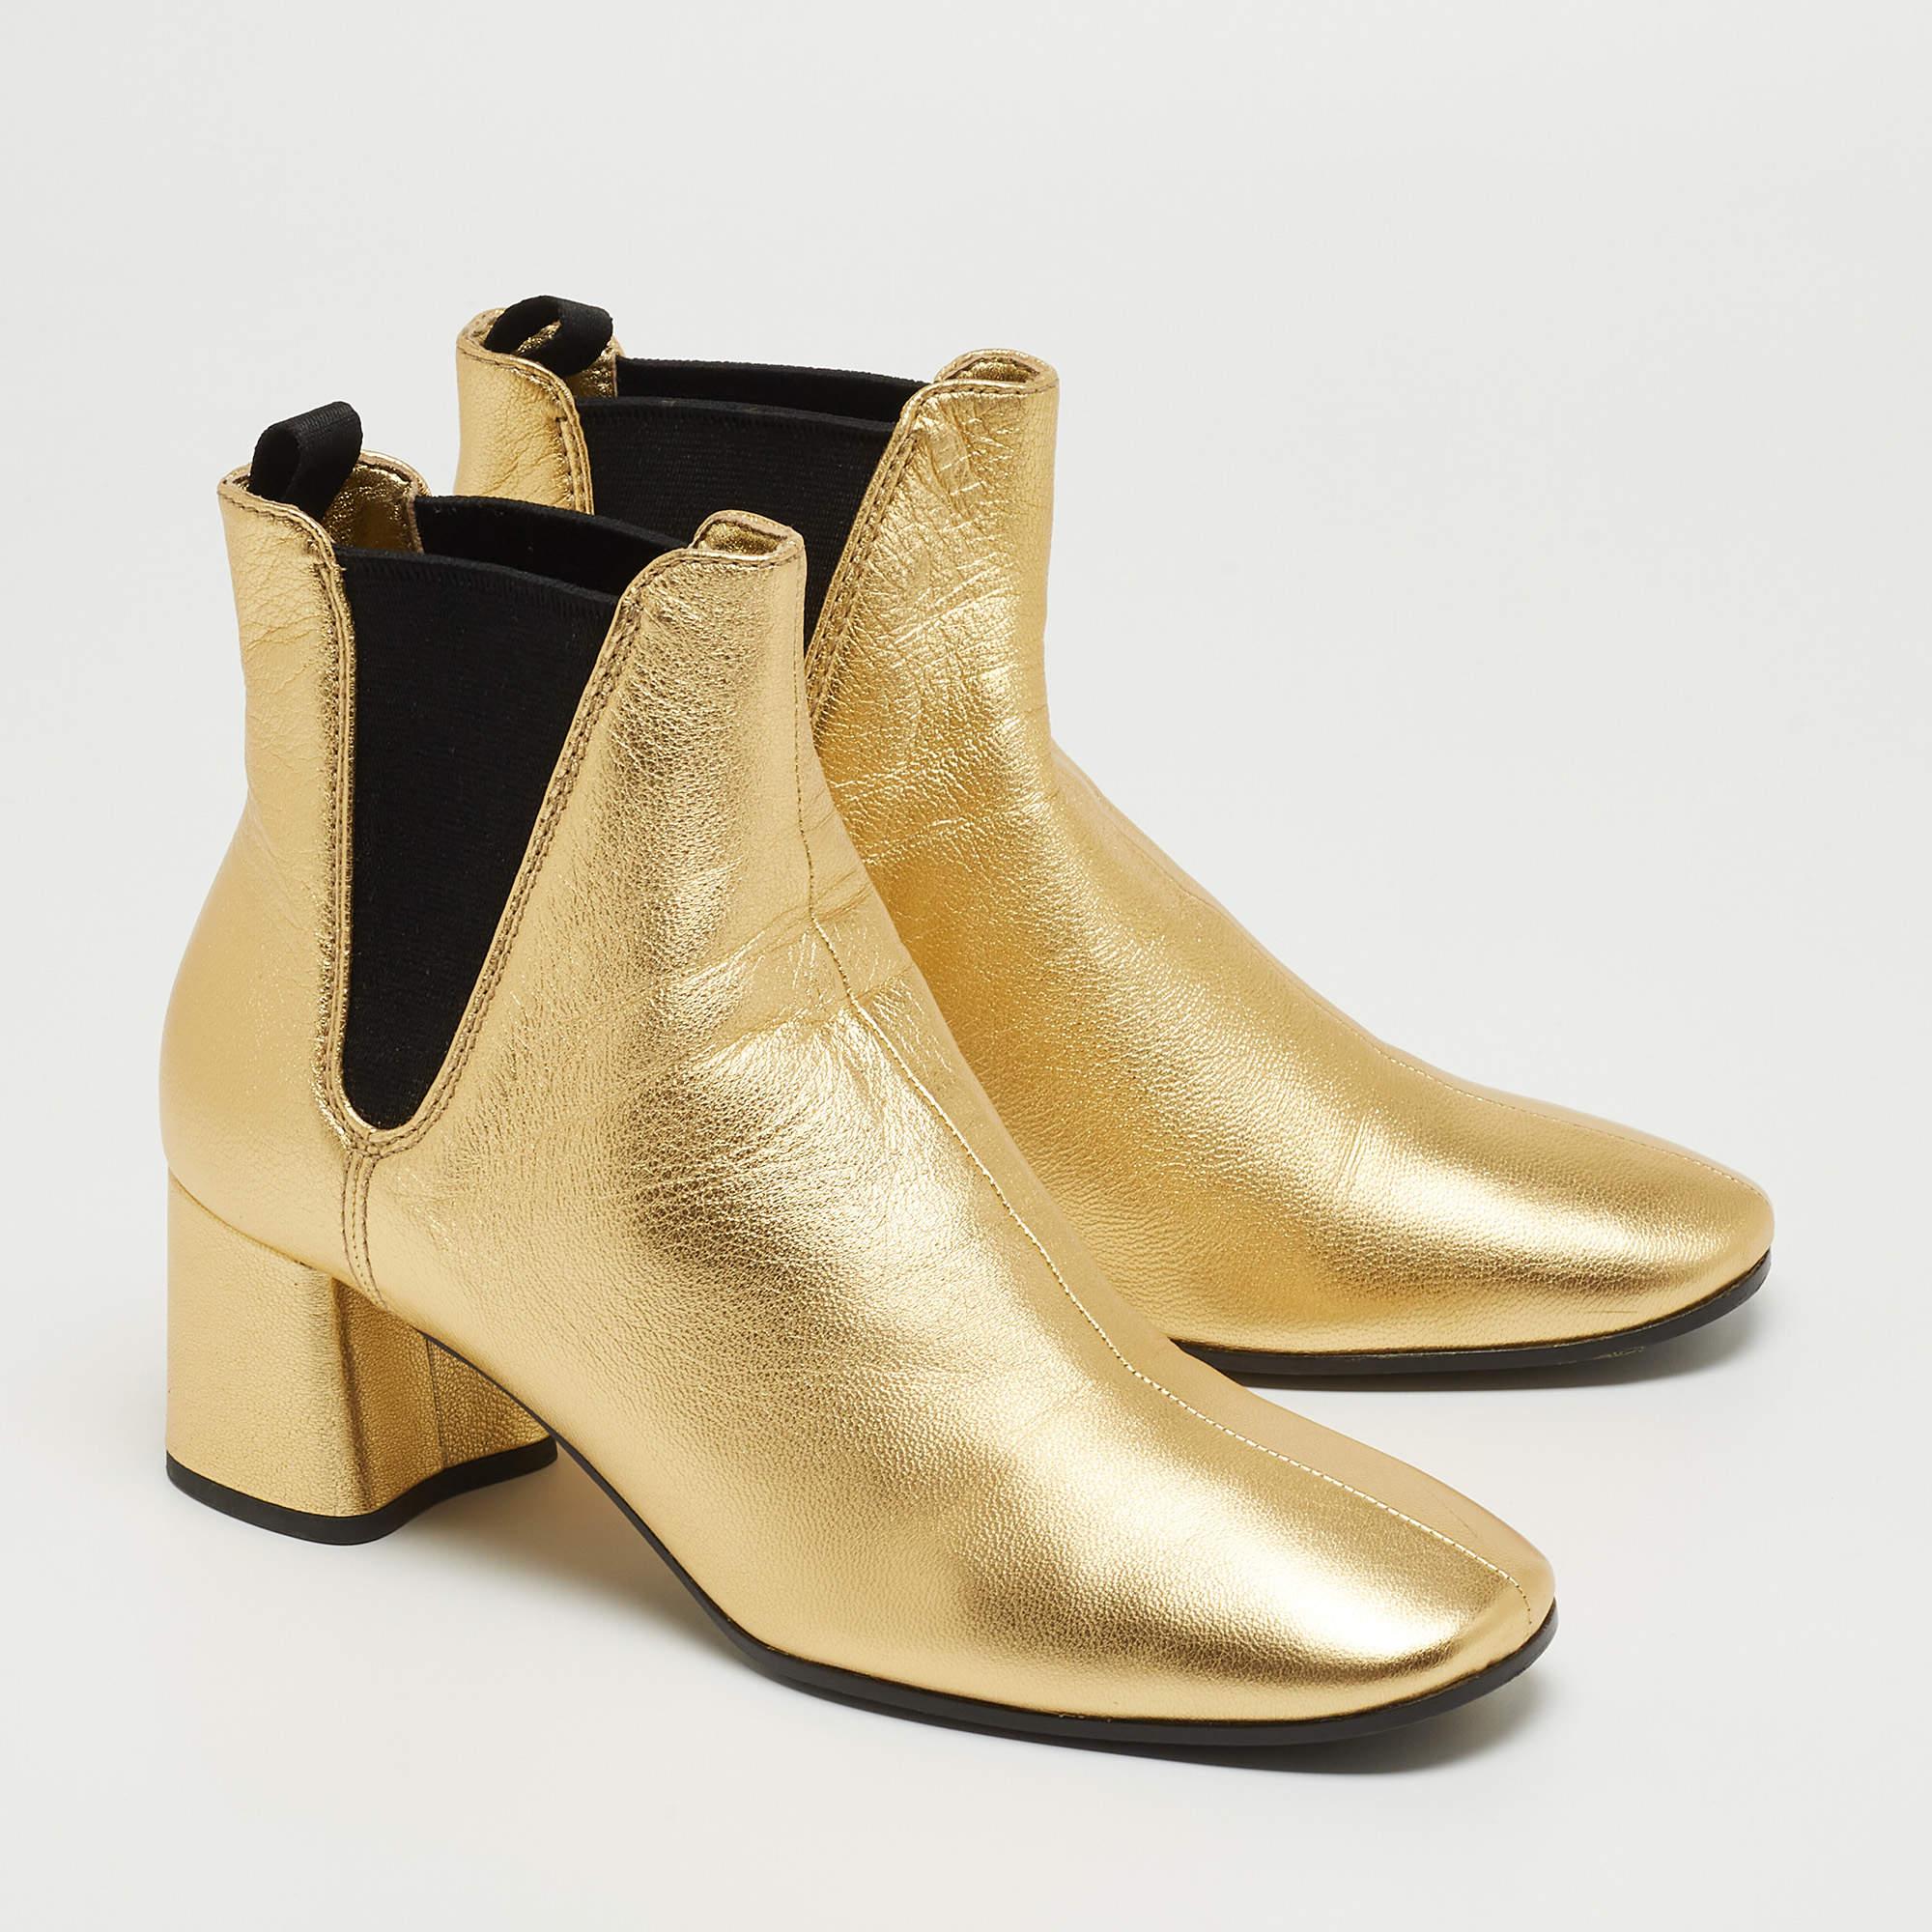 Prada Metallic Gold Leather Ankle Boots Size 37 6